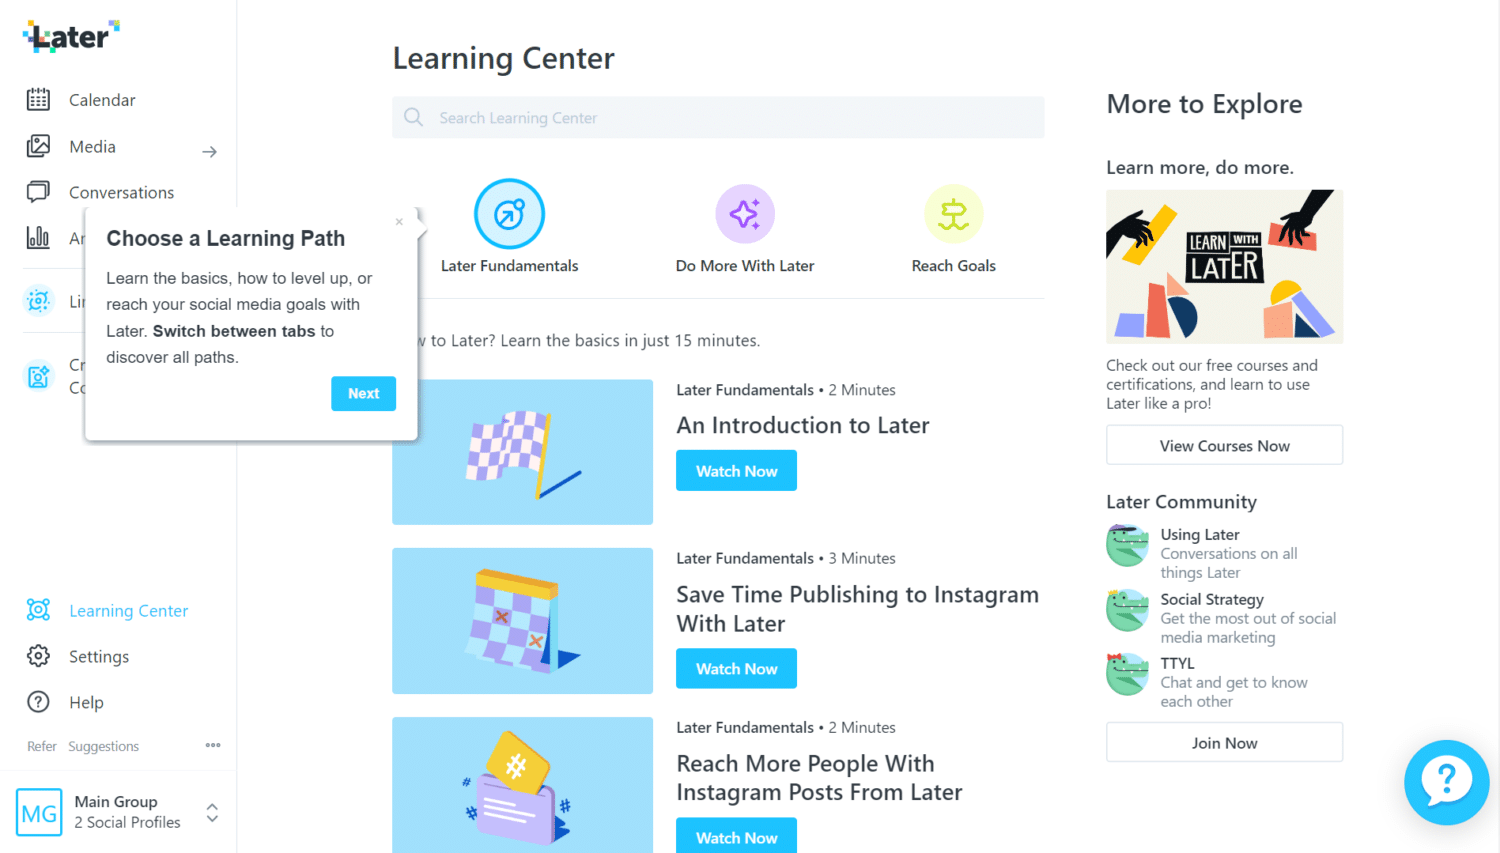 Later Learning Center tab for tips and tutorials